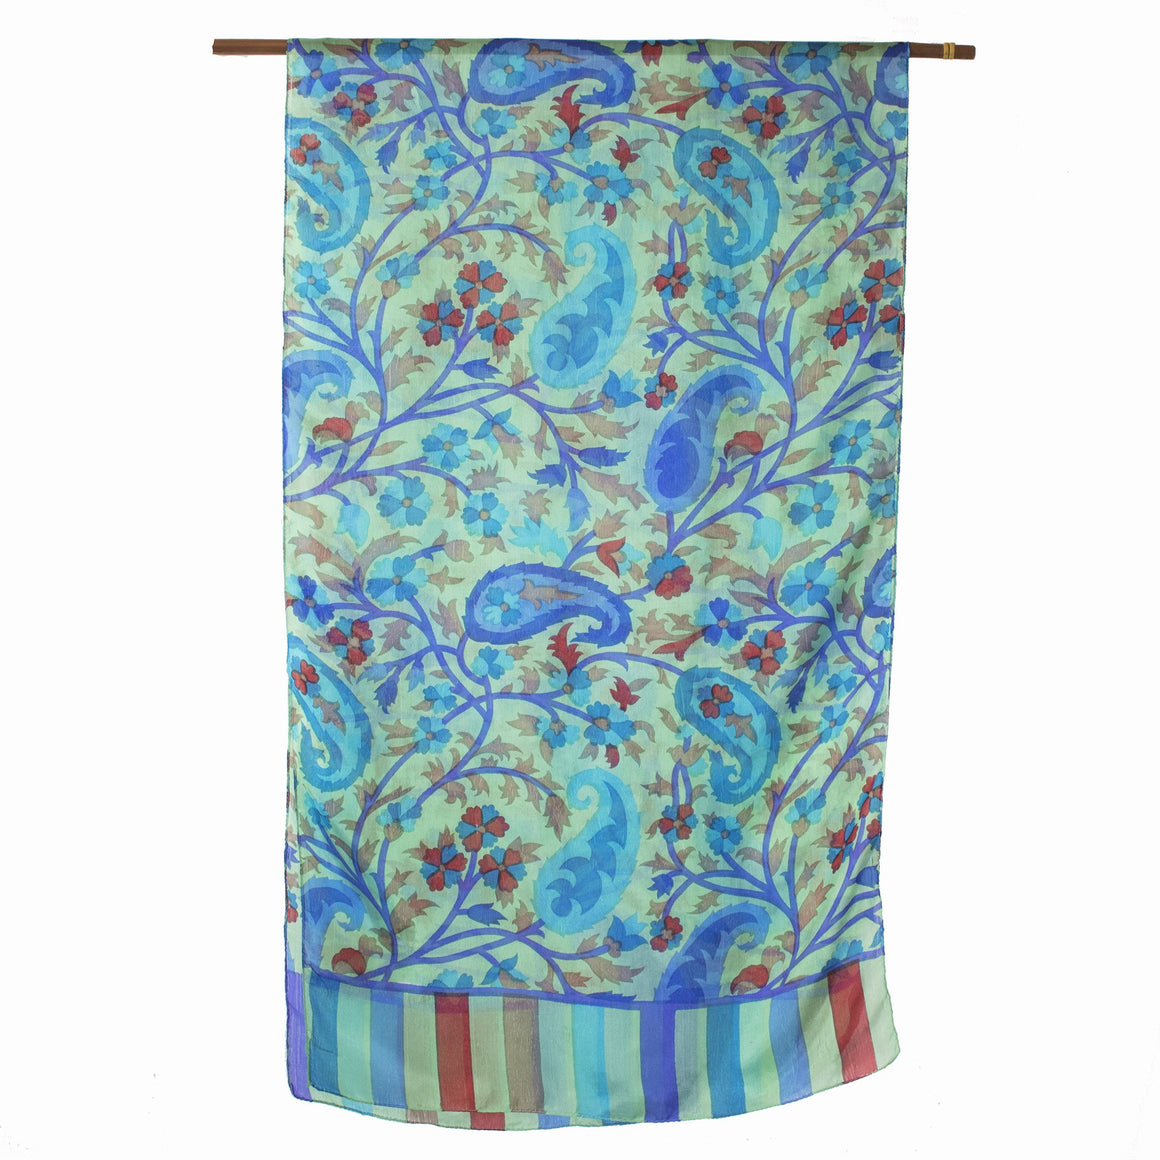 GREEN BLUE WINE 100% SILK FLORAL PAISLEY SCARF SCARVES ZENZOEY JEWELRY & ACCESSORIES 